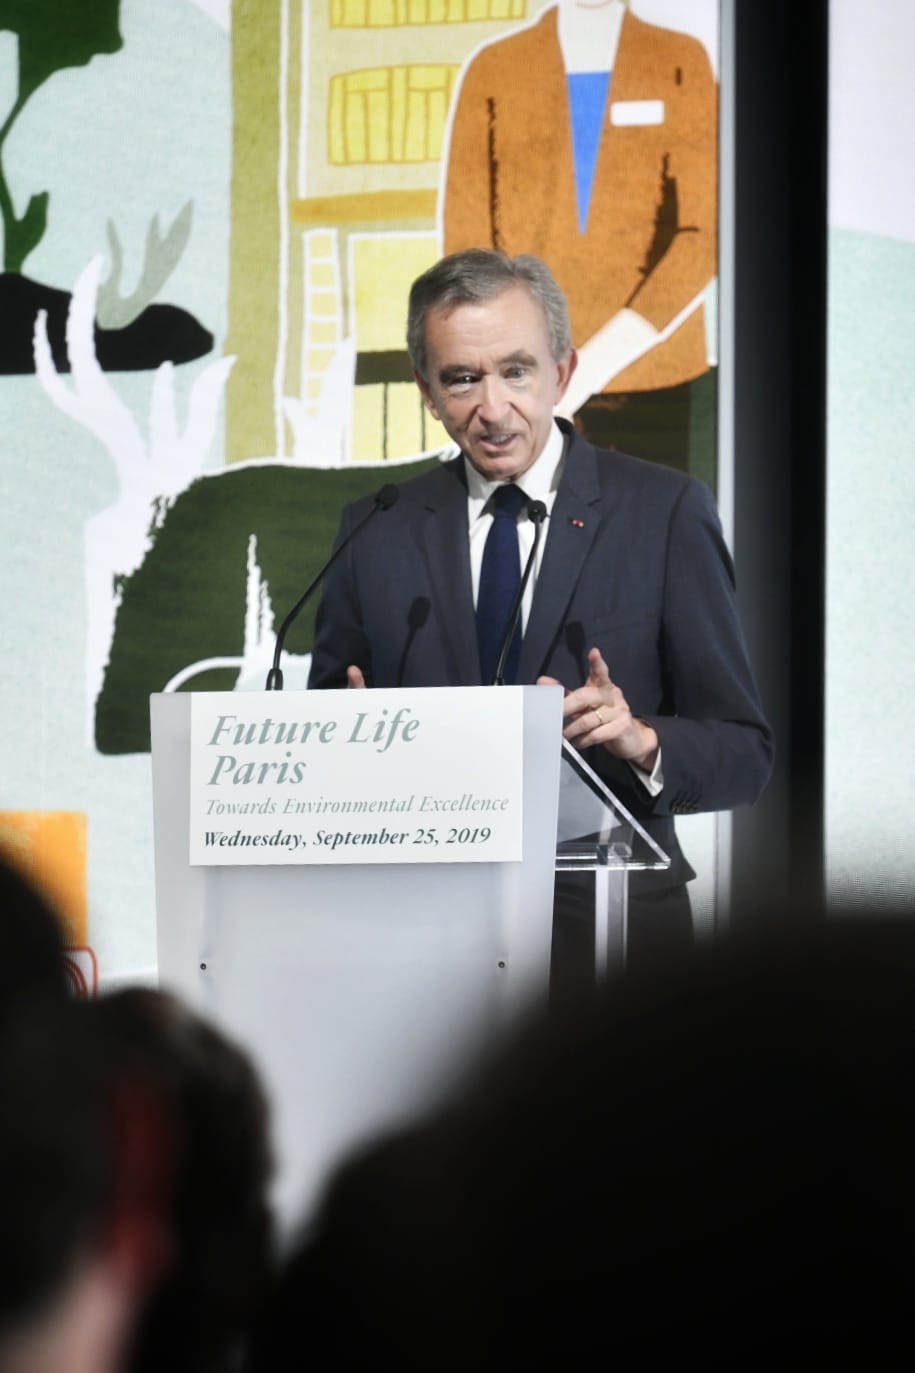 LVMH outlines new biodiversity strategy, Fashion & Retail News